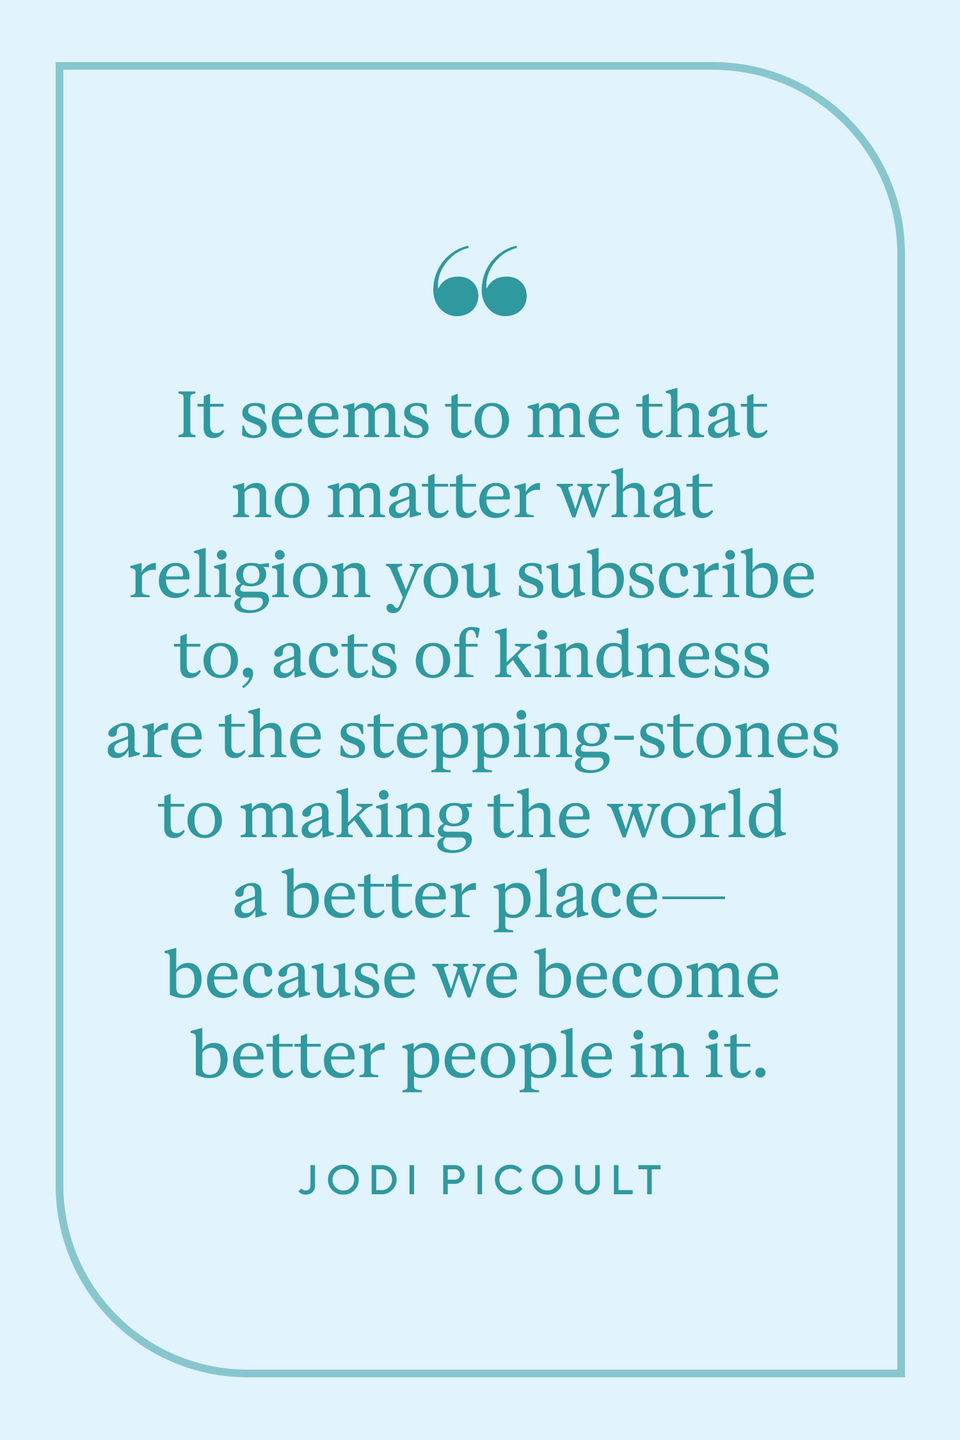 <p>"It seems to me that no matter what religion you subscribe to, acts of kindness are the stepping-stones to making the world a better place—because we become better people in it," Jodi Picoult said in <a href="https://www.amazon.com/Change-of-Heart-Jodi-Picoult-audiobook/dp/B01D3I7OM2/ref=sr_1_1?crid=JWPCRWMRJOEO&keywords=Change+of+Heart&qid=1659040283&s=audible&sprefix=change+of+heart%2Caudible%2C137&sr=1-1&tag=syn-yahoo-20&ascsubtag=%5Bartid%7C10072.g.40742088%5Bsrc%7Cyahoo-us" rel="nofollow noopener" target="_blank" data-ylk="slk:Change of Heart." class="link "><em>Change of Heart.</em></a></p>